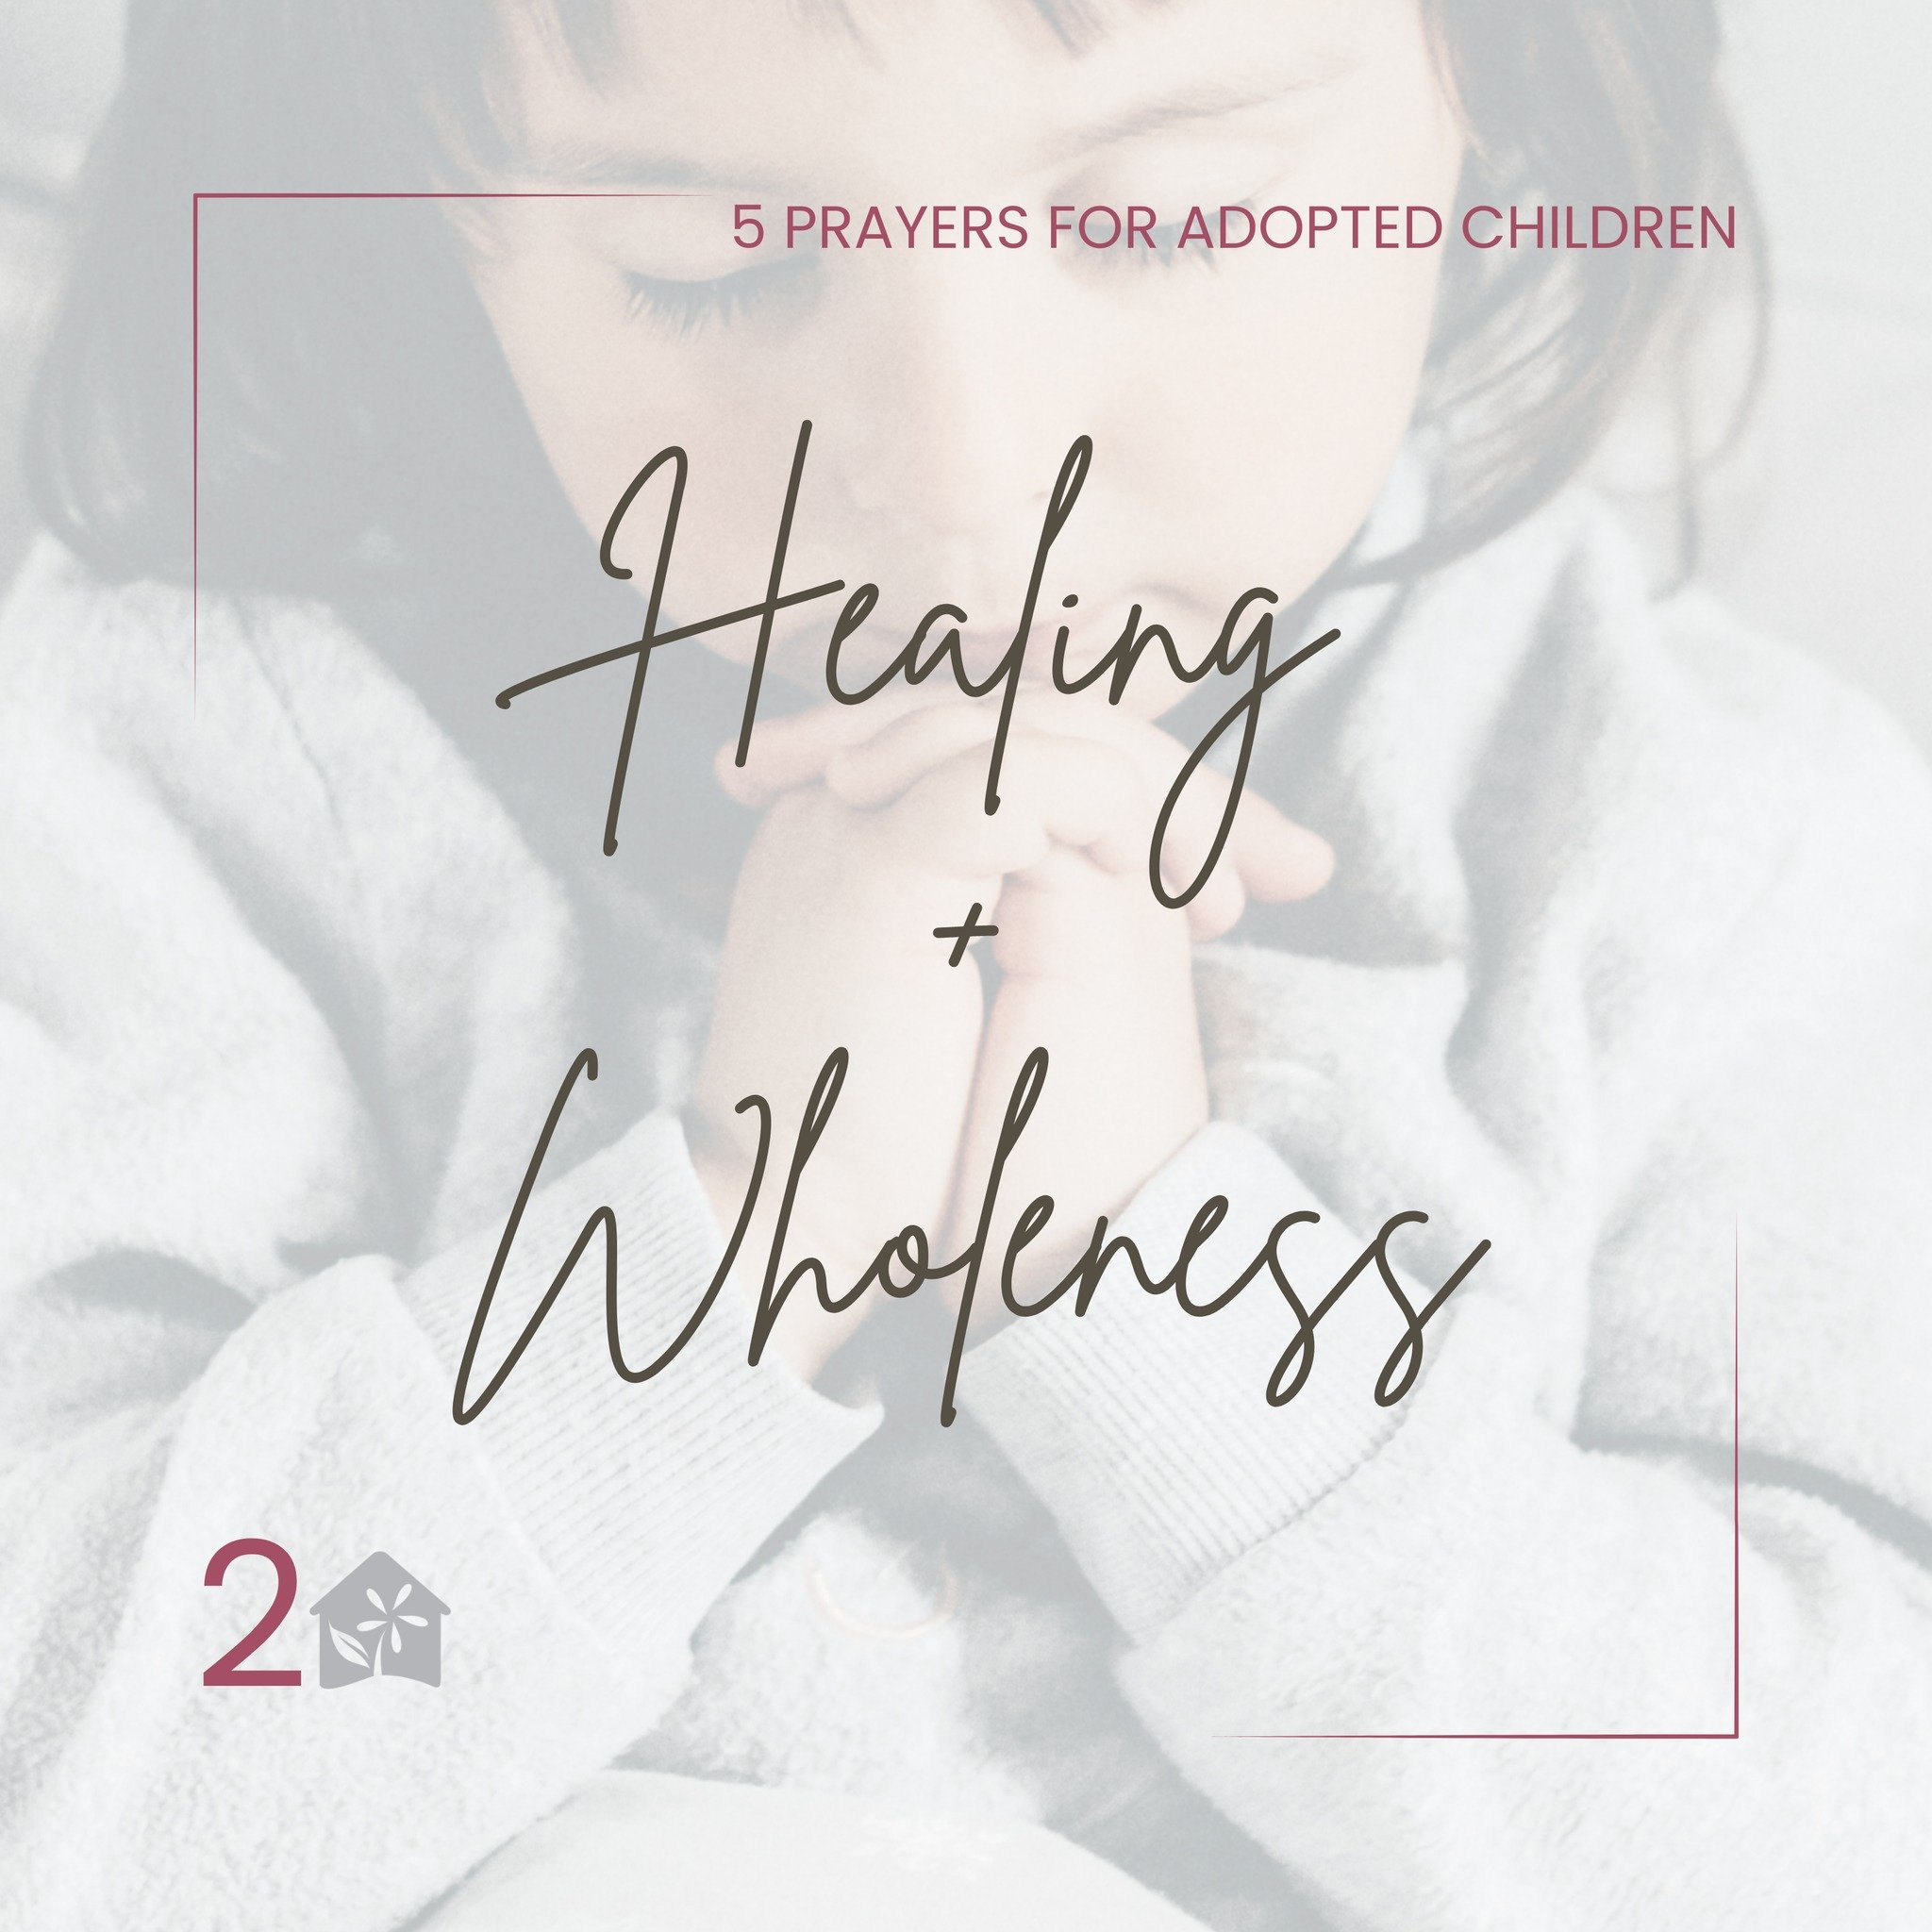 Adoption journeys may carry wounds from past experiences. Pray for healing and wholeness, both physical and emotional, and ask for divine comfort to heal scars of the past. 🙏 

https://www.romania-reborn.org/blog/5-prayers-for-adopted-children